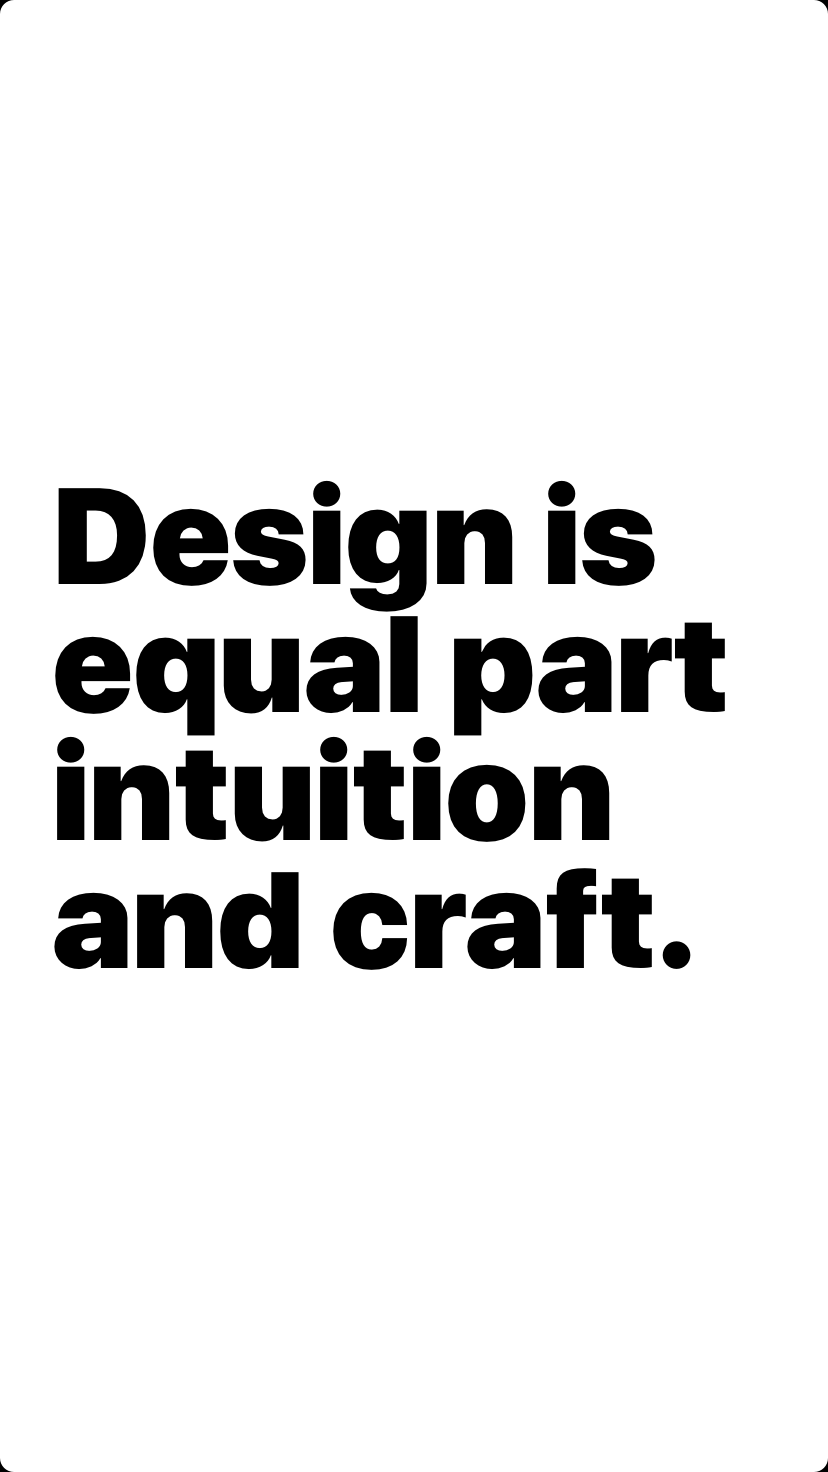 Design is equal part intuition and craft.